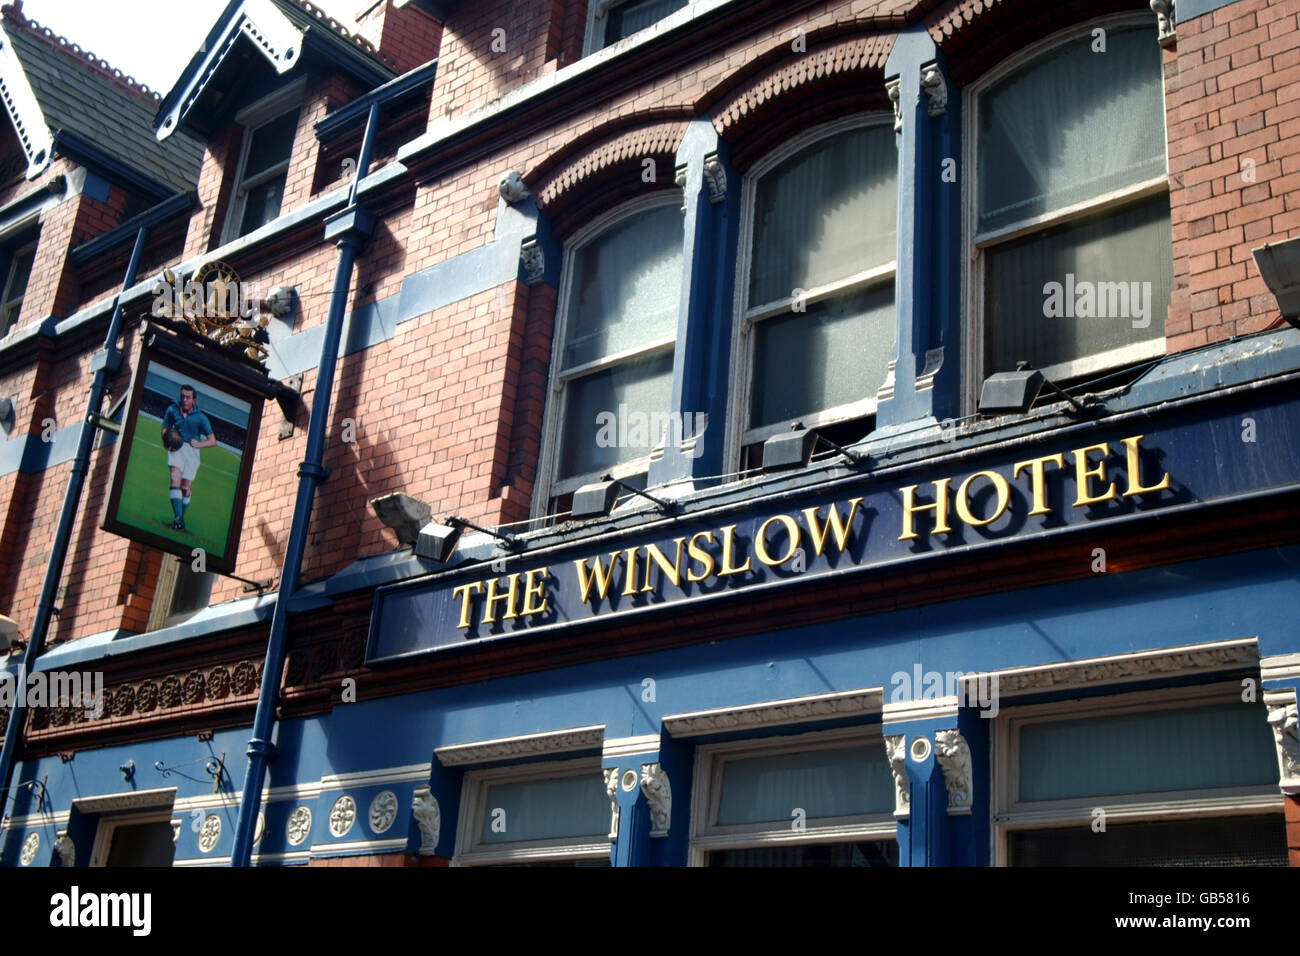 The local supporters pub outside Goodison Park, home of Everton (The Winslow Hotel with Everton legend 'Dixie Dean' pictured on the board outside) Stock Photo